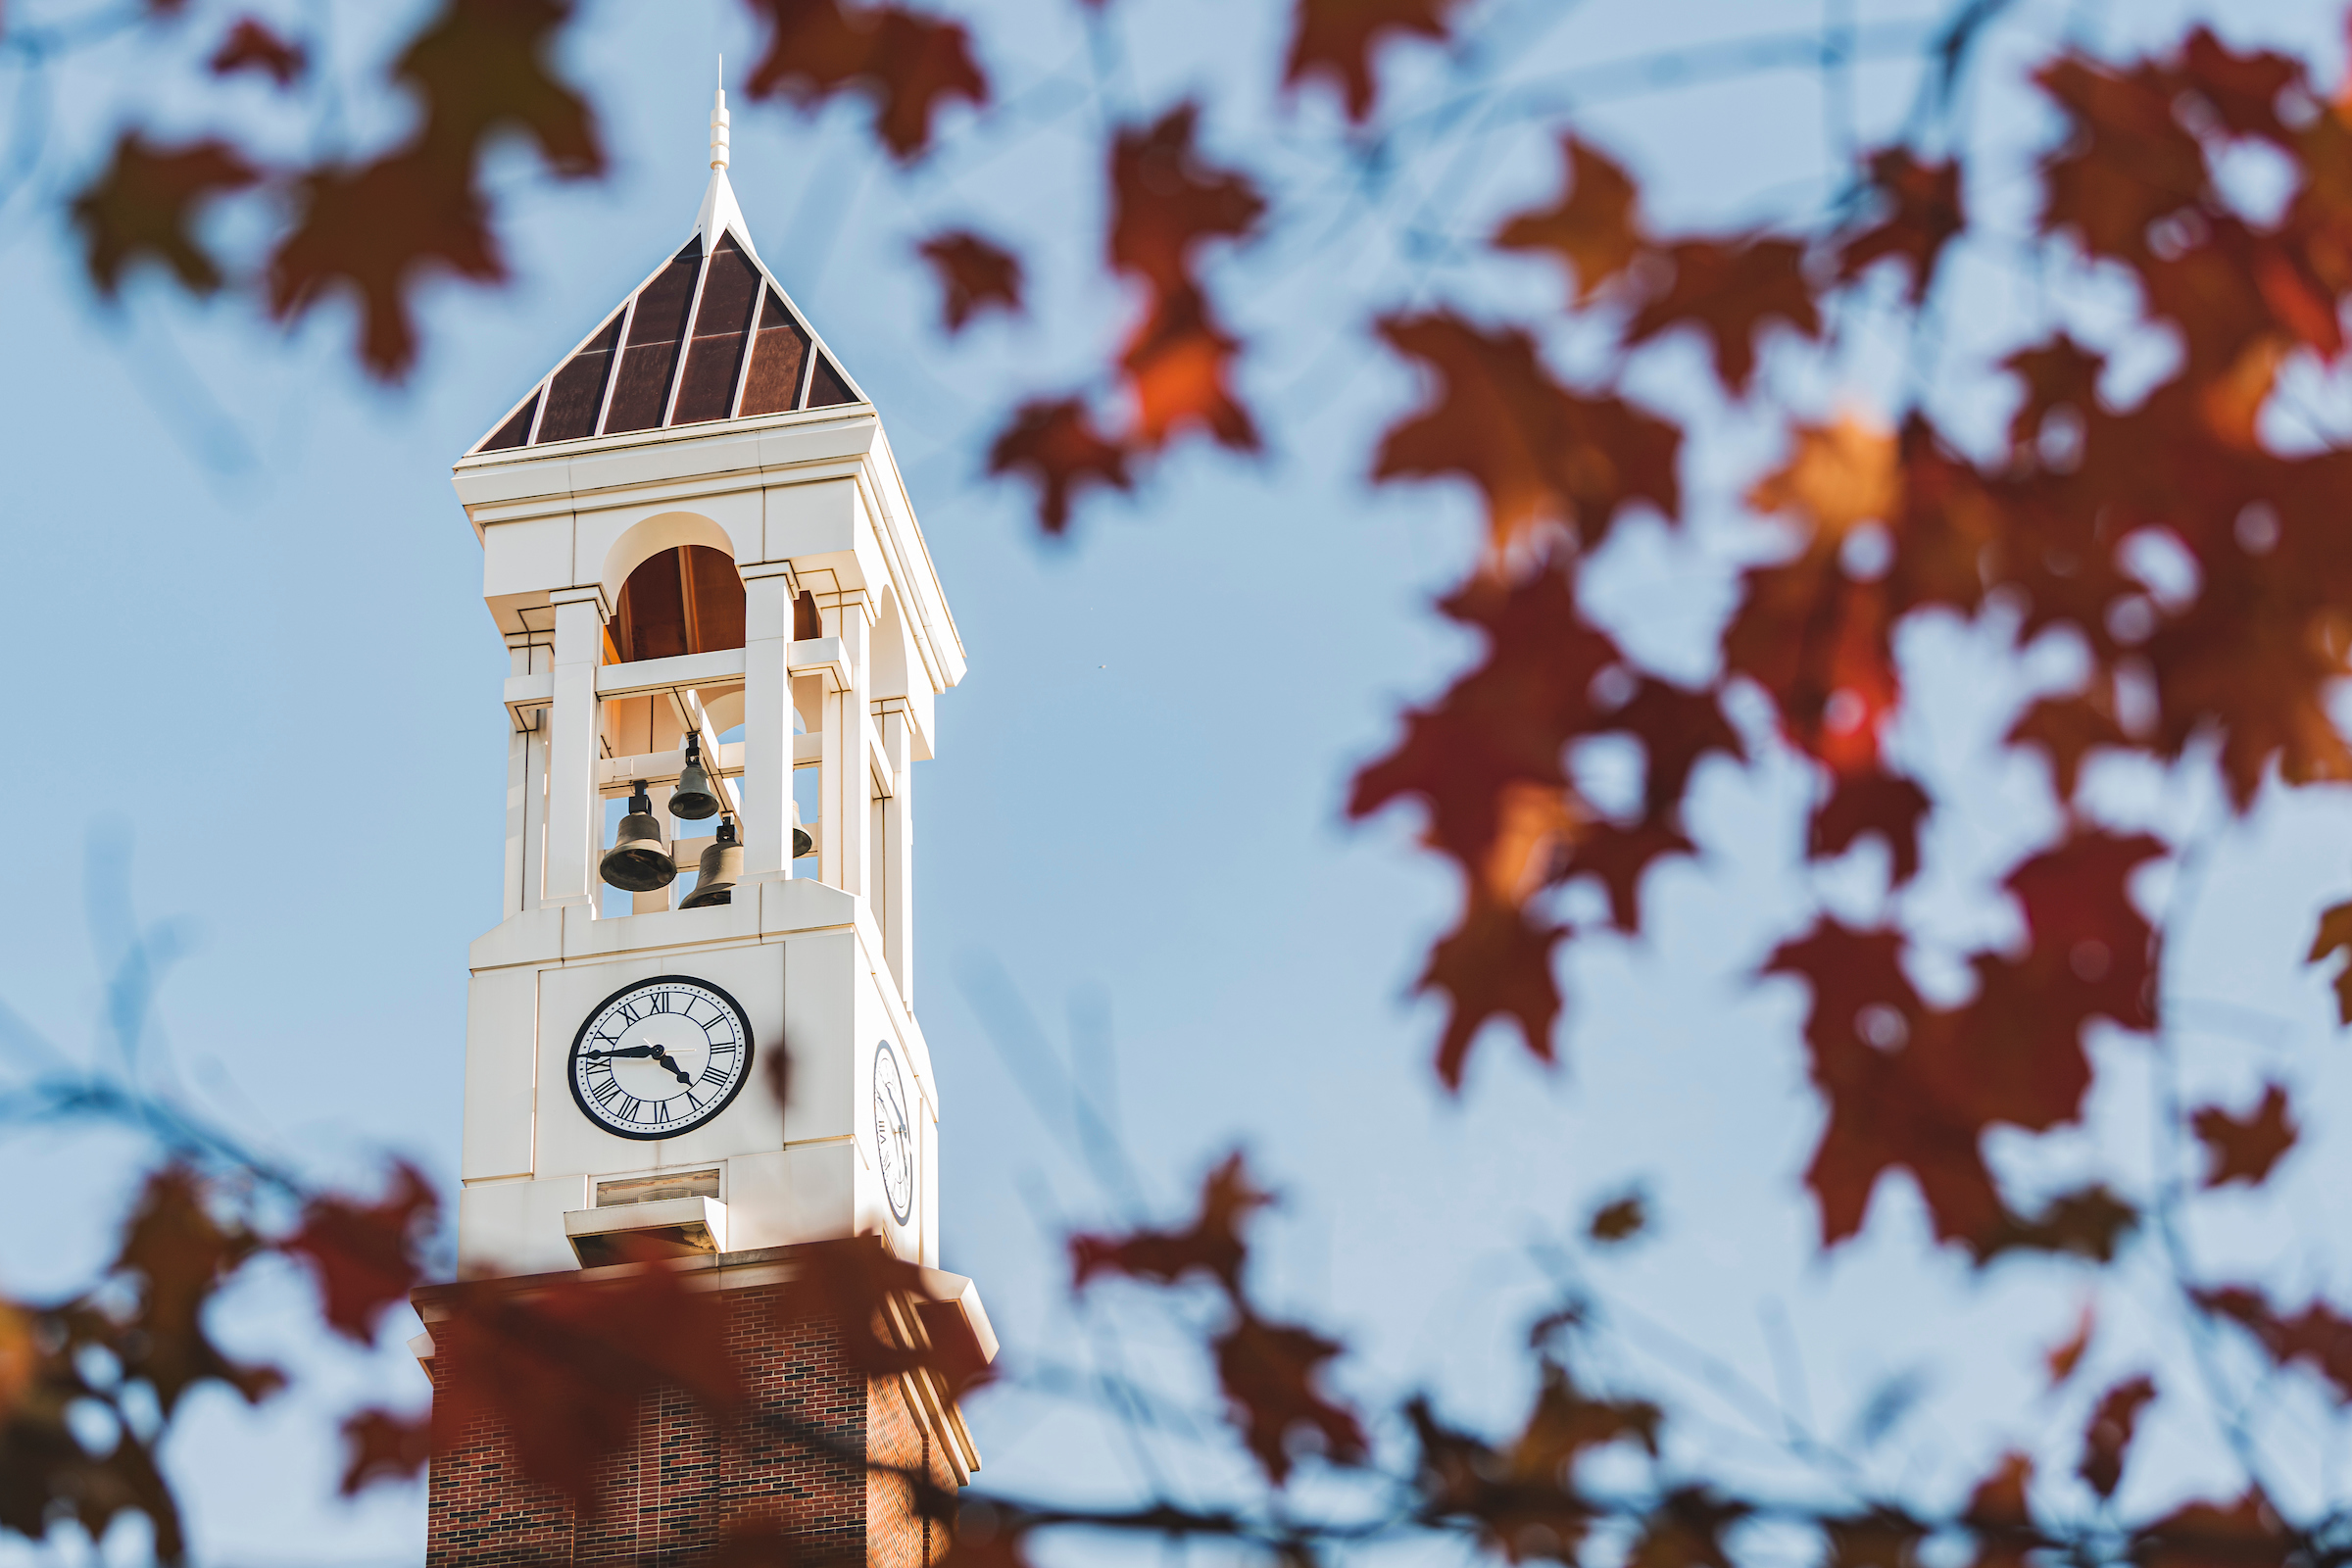 Purdue's Bell Tower is framed by red fall leaves